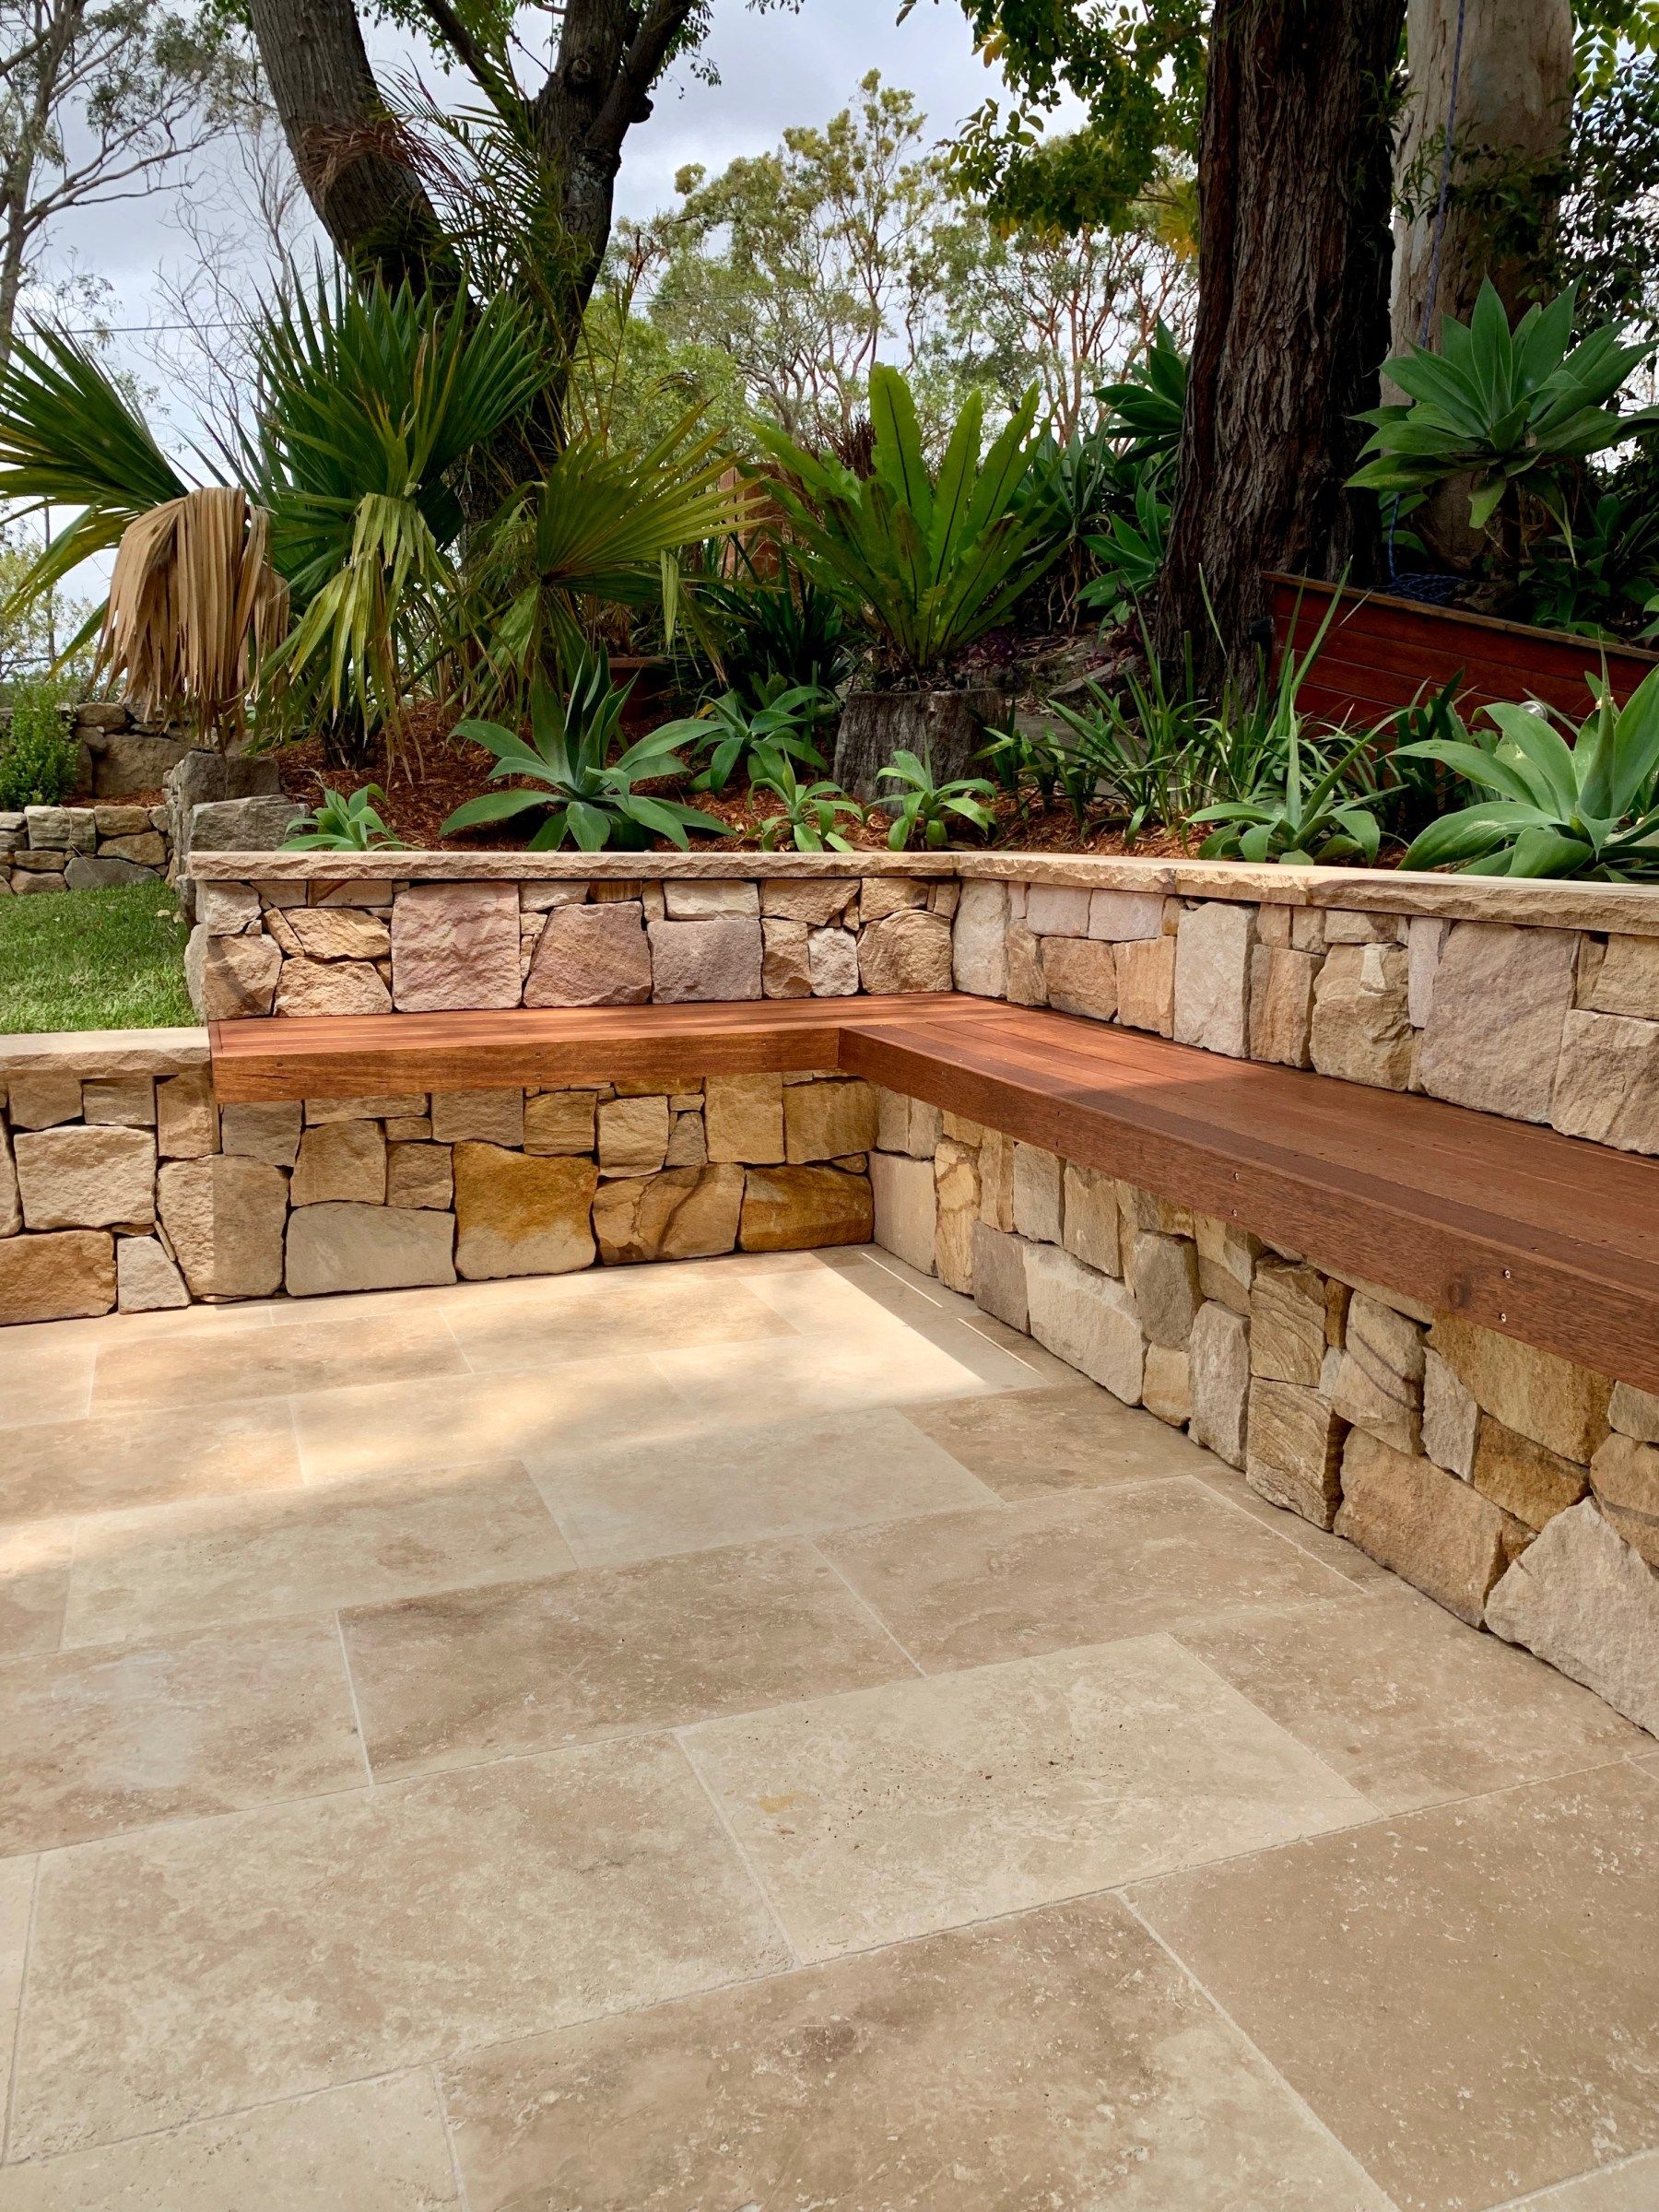 Innovative Ways to Use Garden Tiles for
Outdoor Spaces